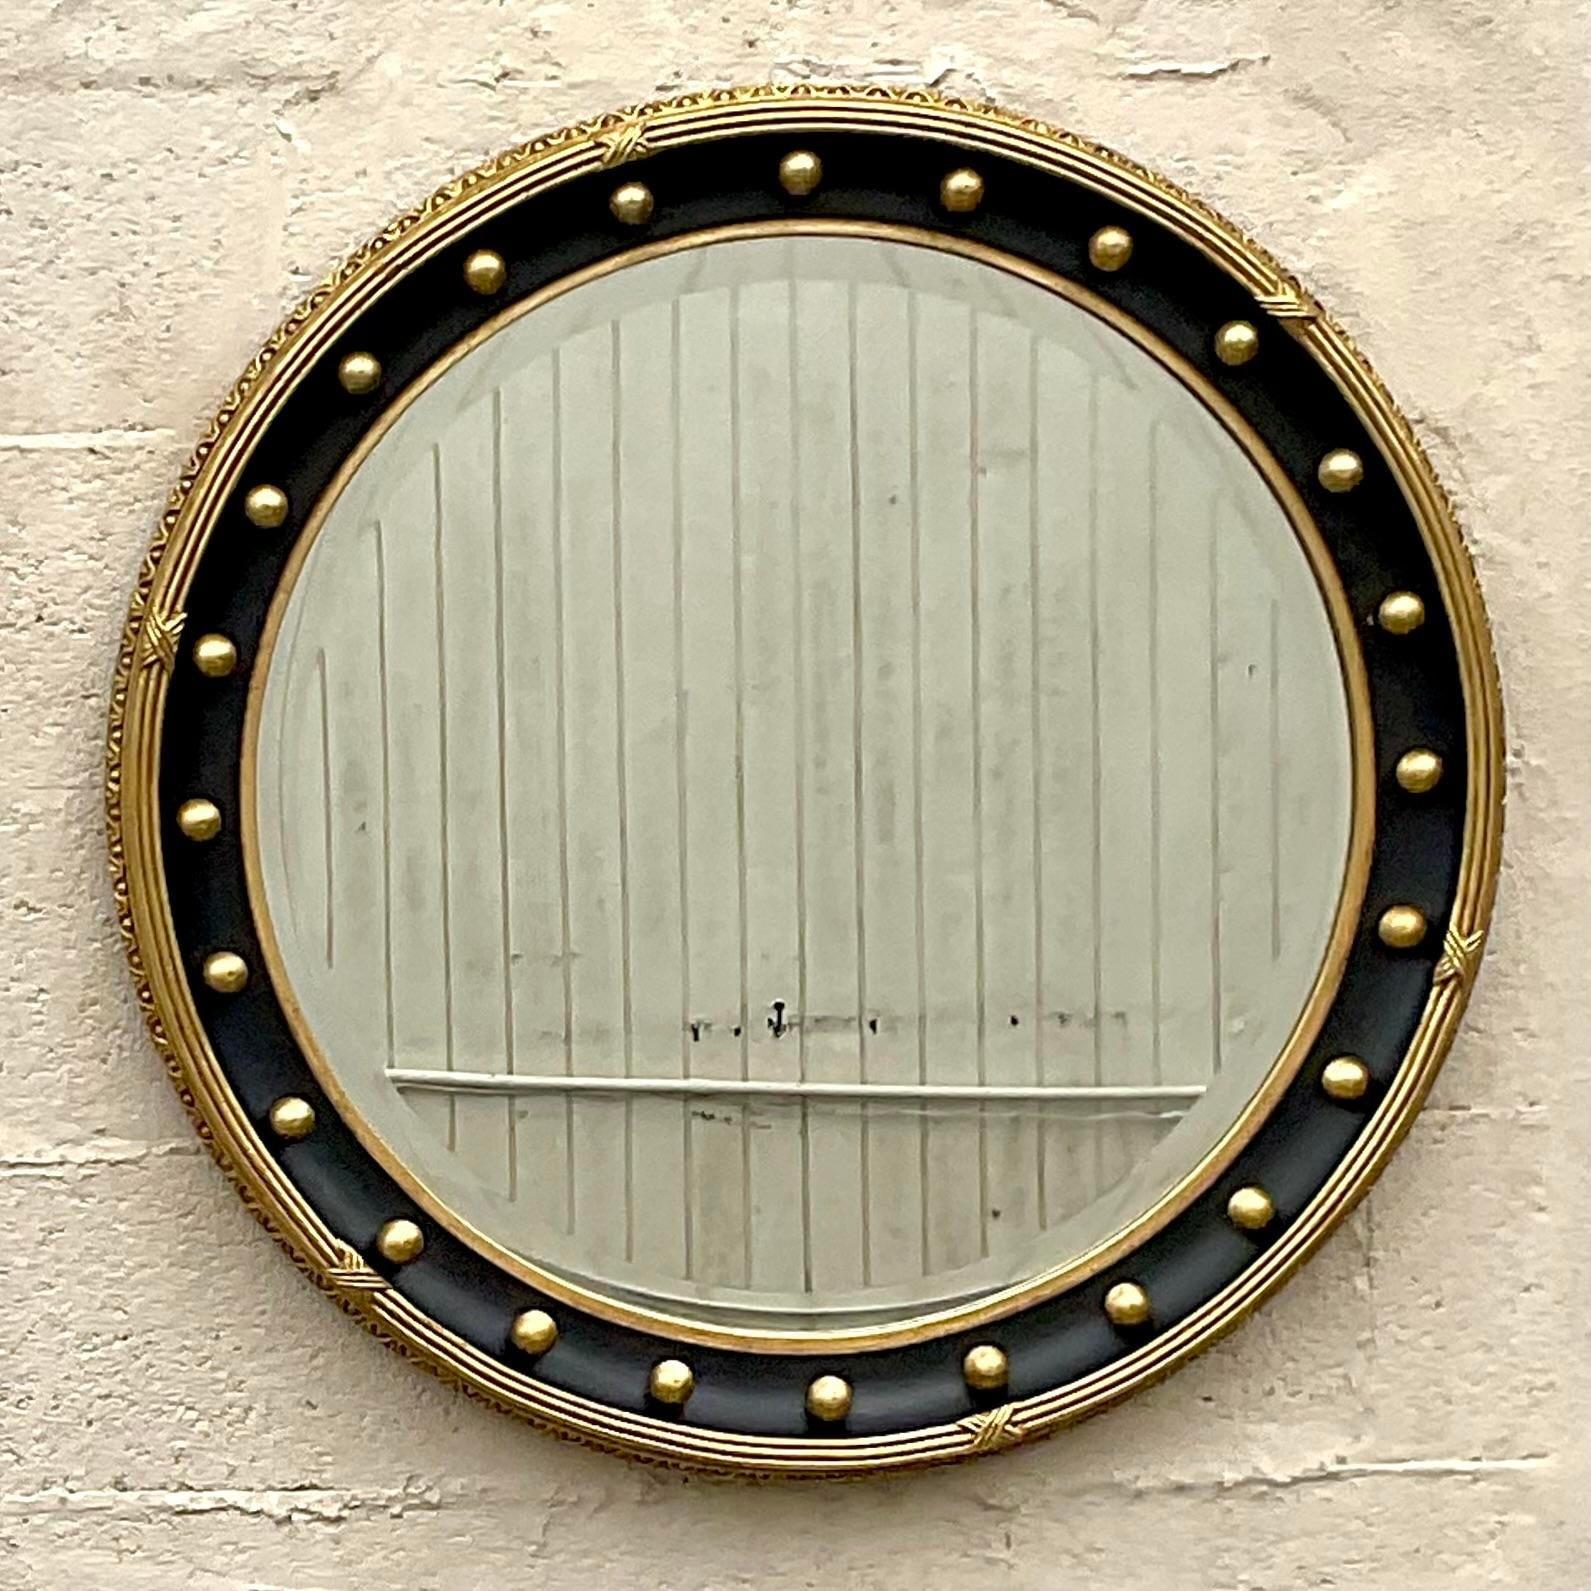 A fabulous vintage Federal wall mirror. A chic round gilt parcel style with classic raised details. Two mirrors available as a pair is needed. Acquired from a Palm Beach estate.